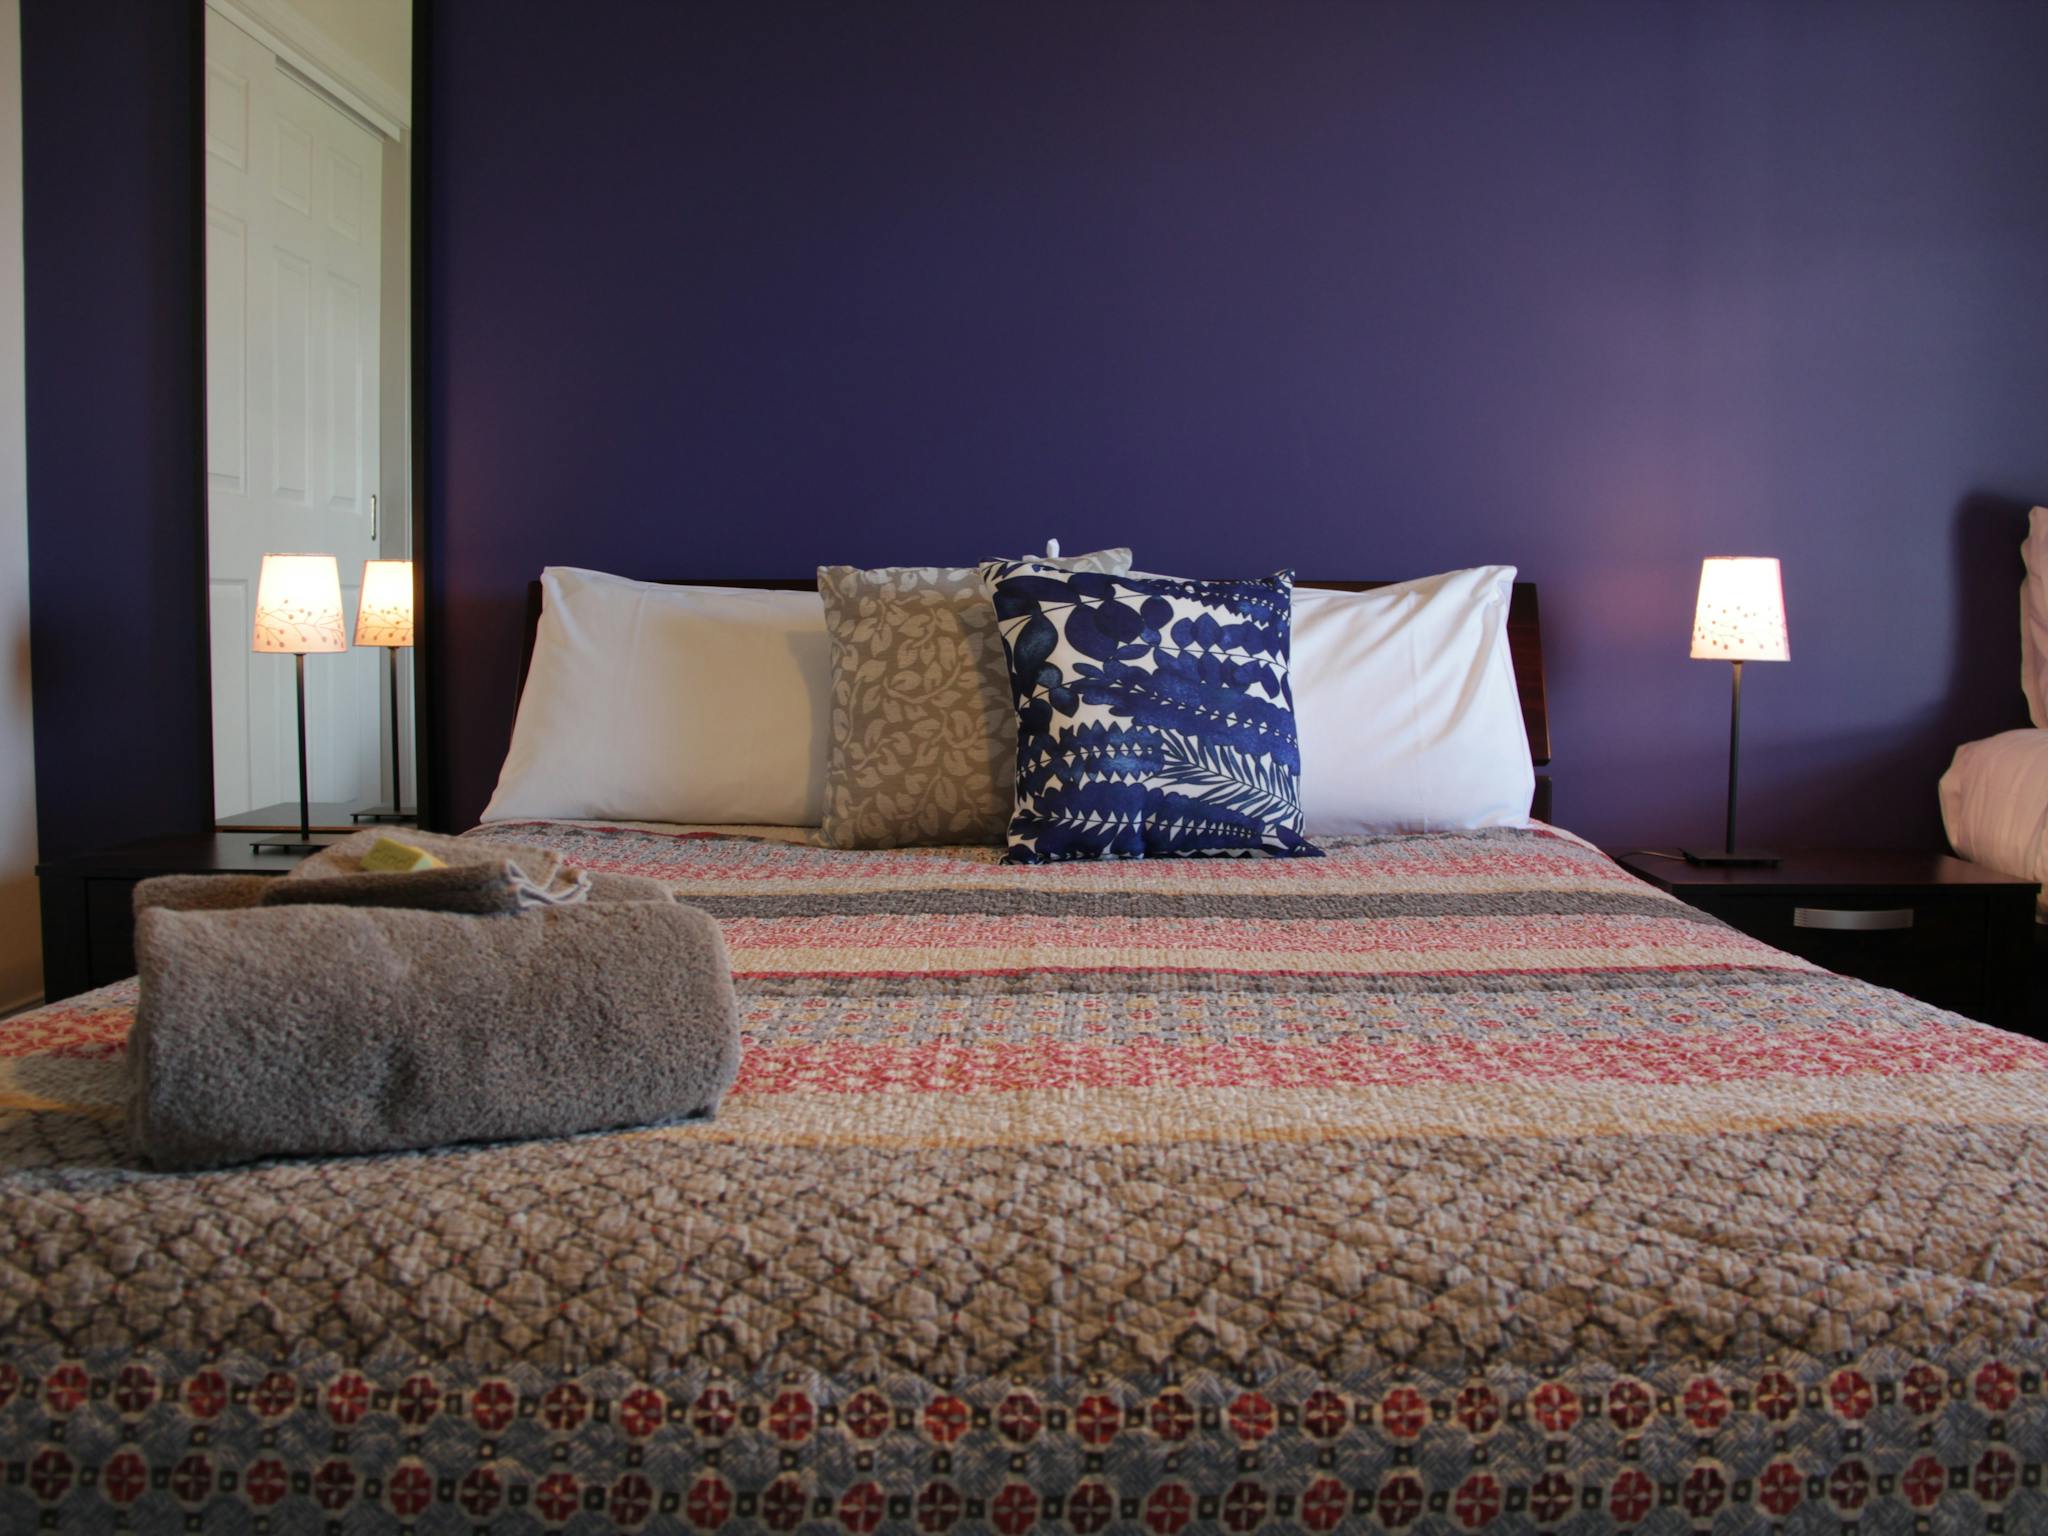 Queen size bed and a single bed in a room with a purple wall